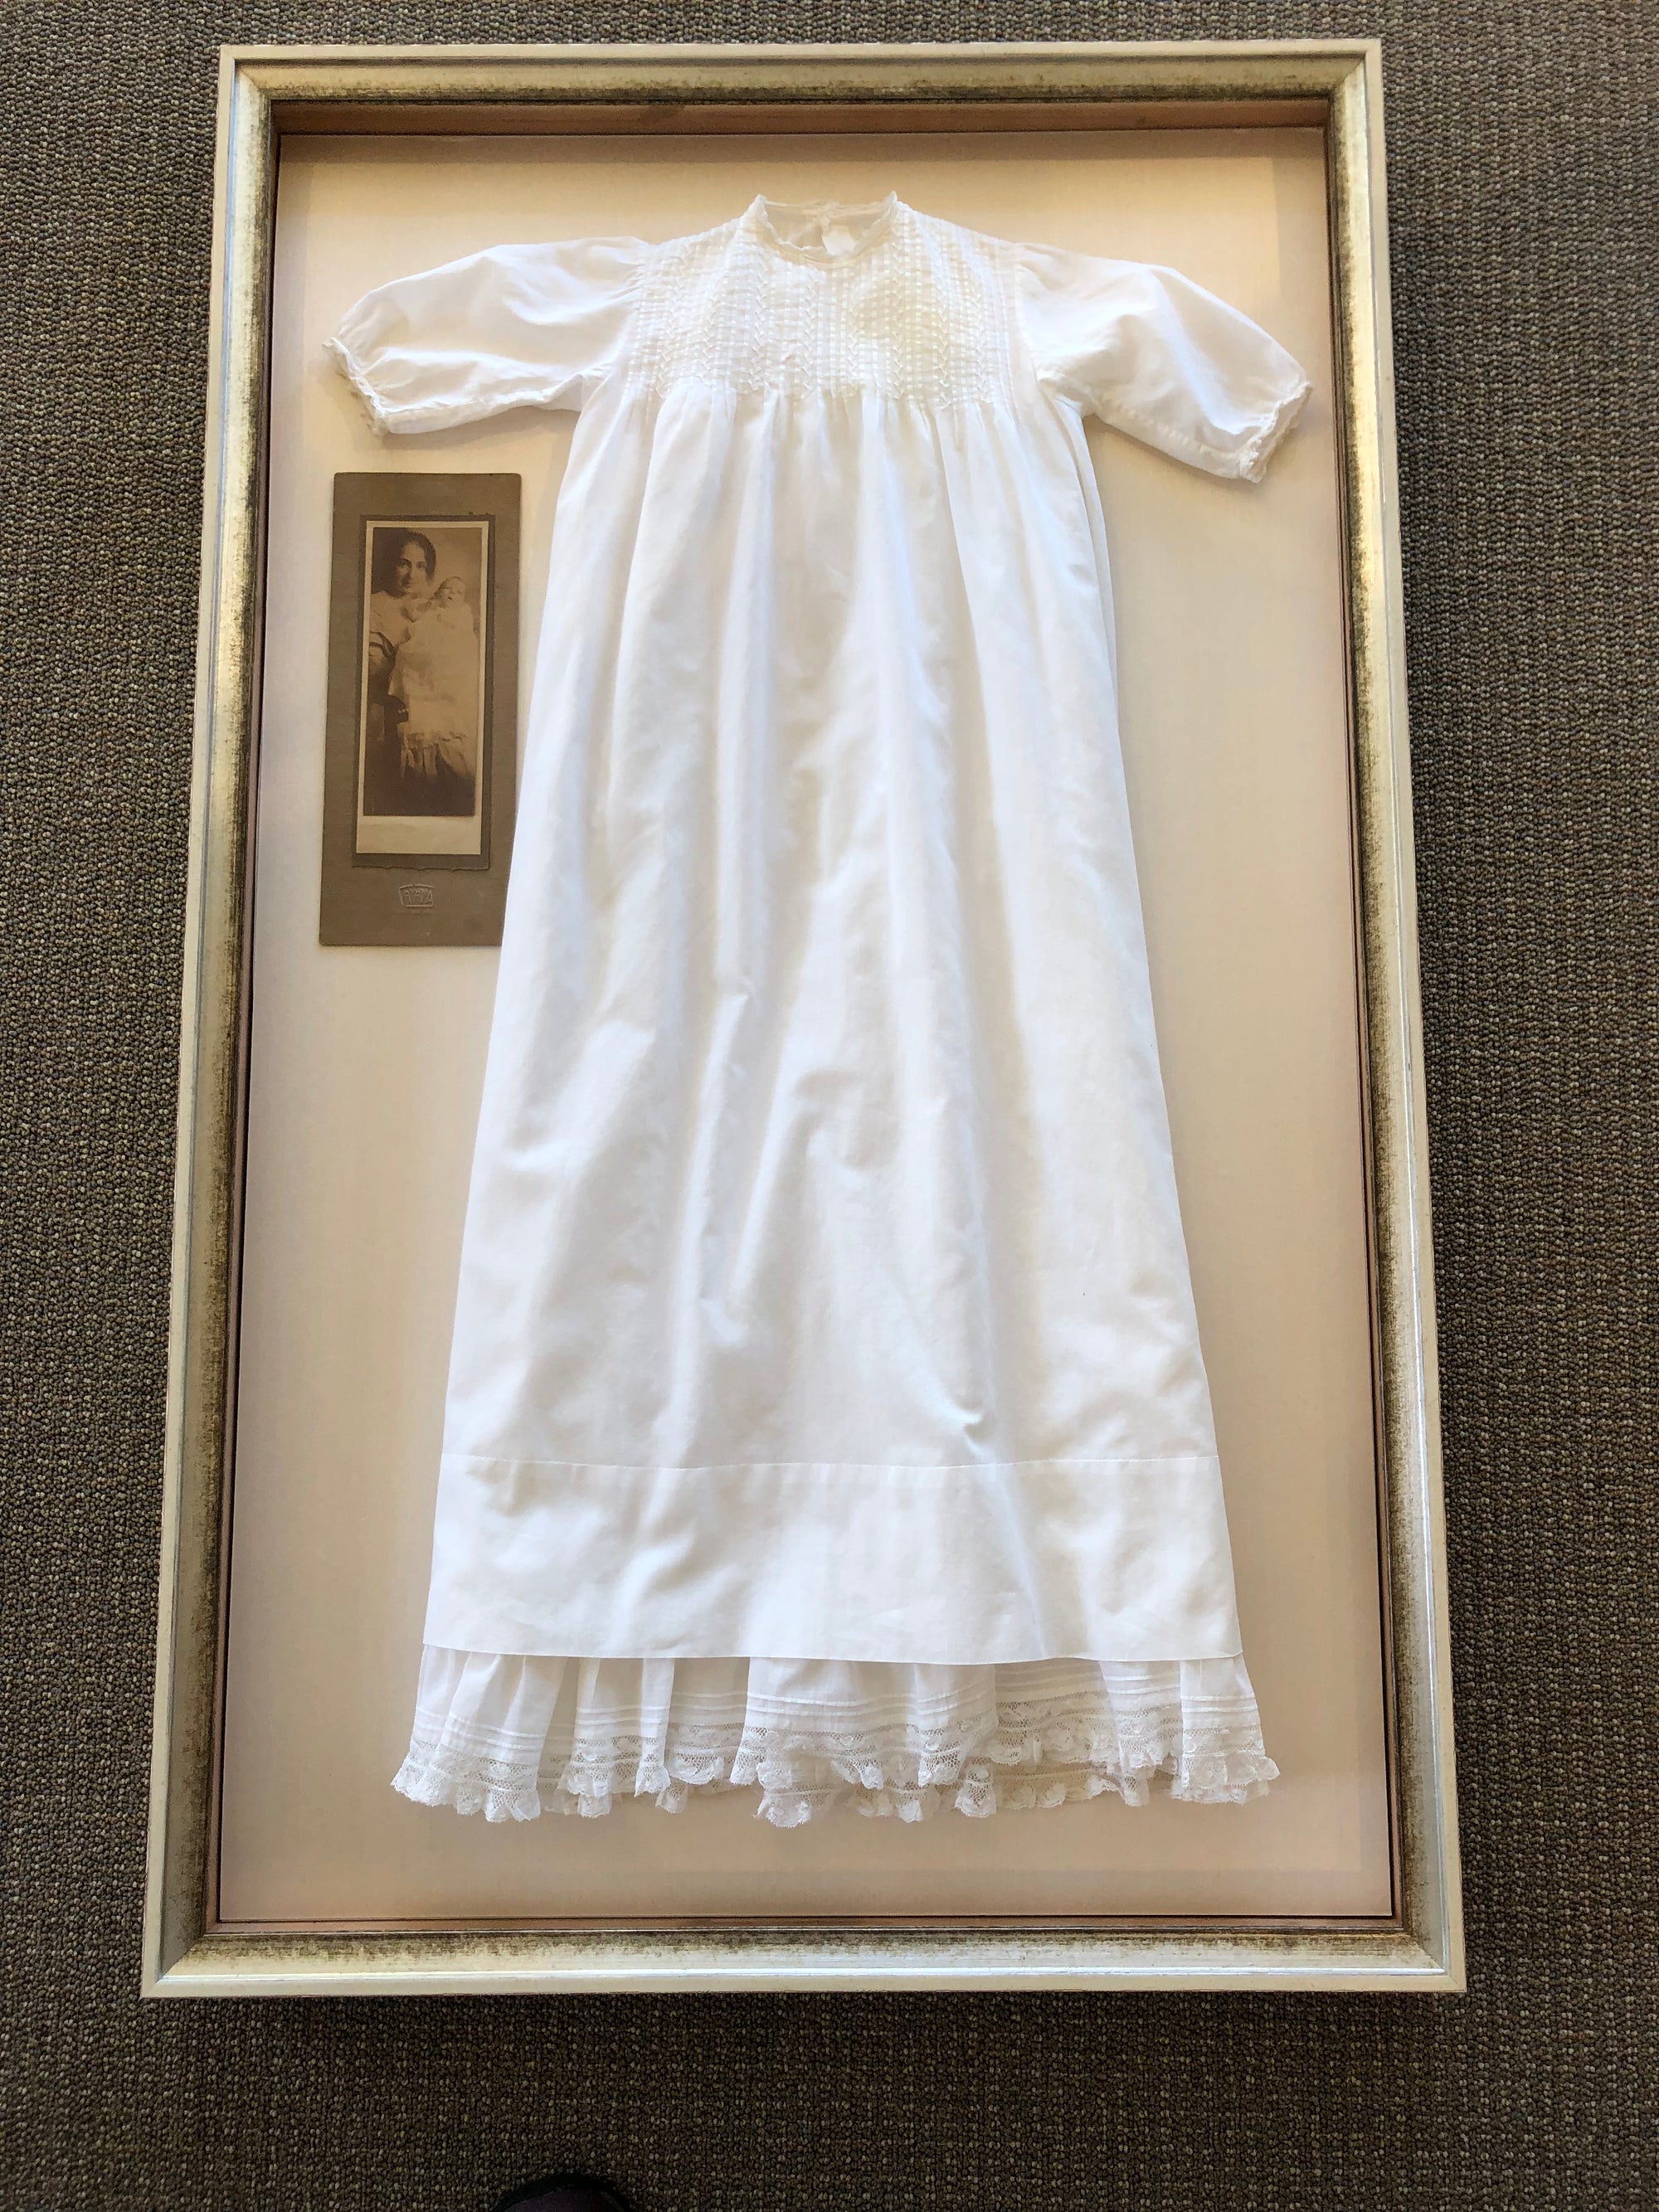 Shadow Box for christening dress and baby photograph 